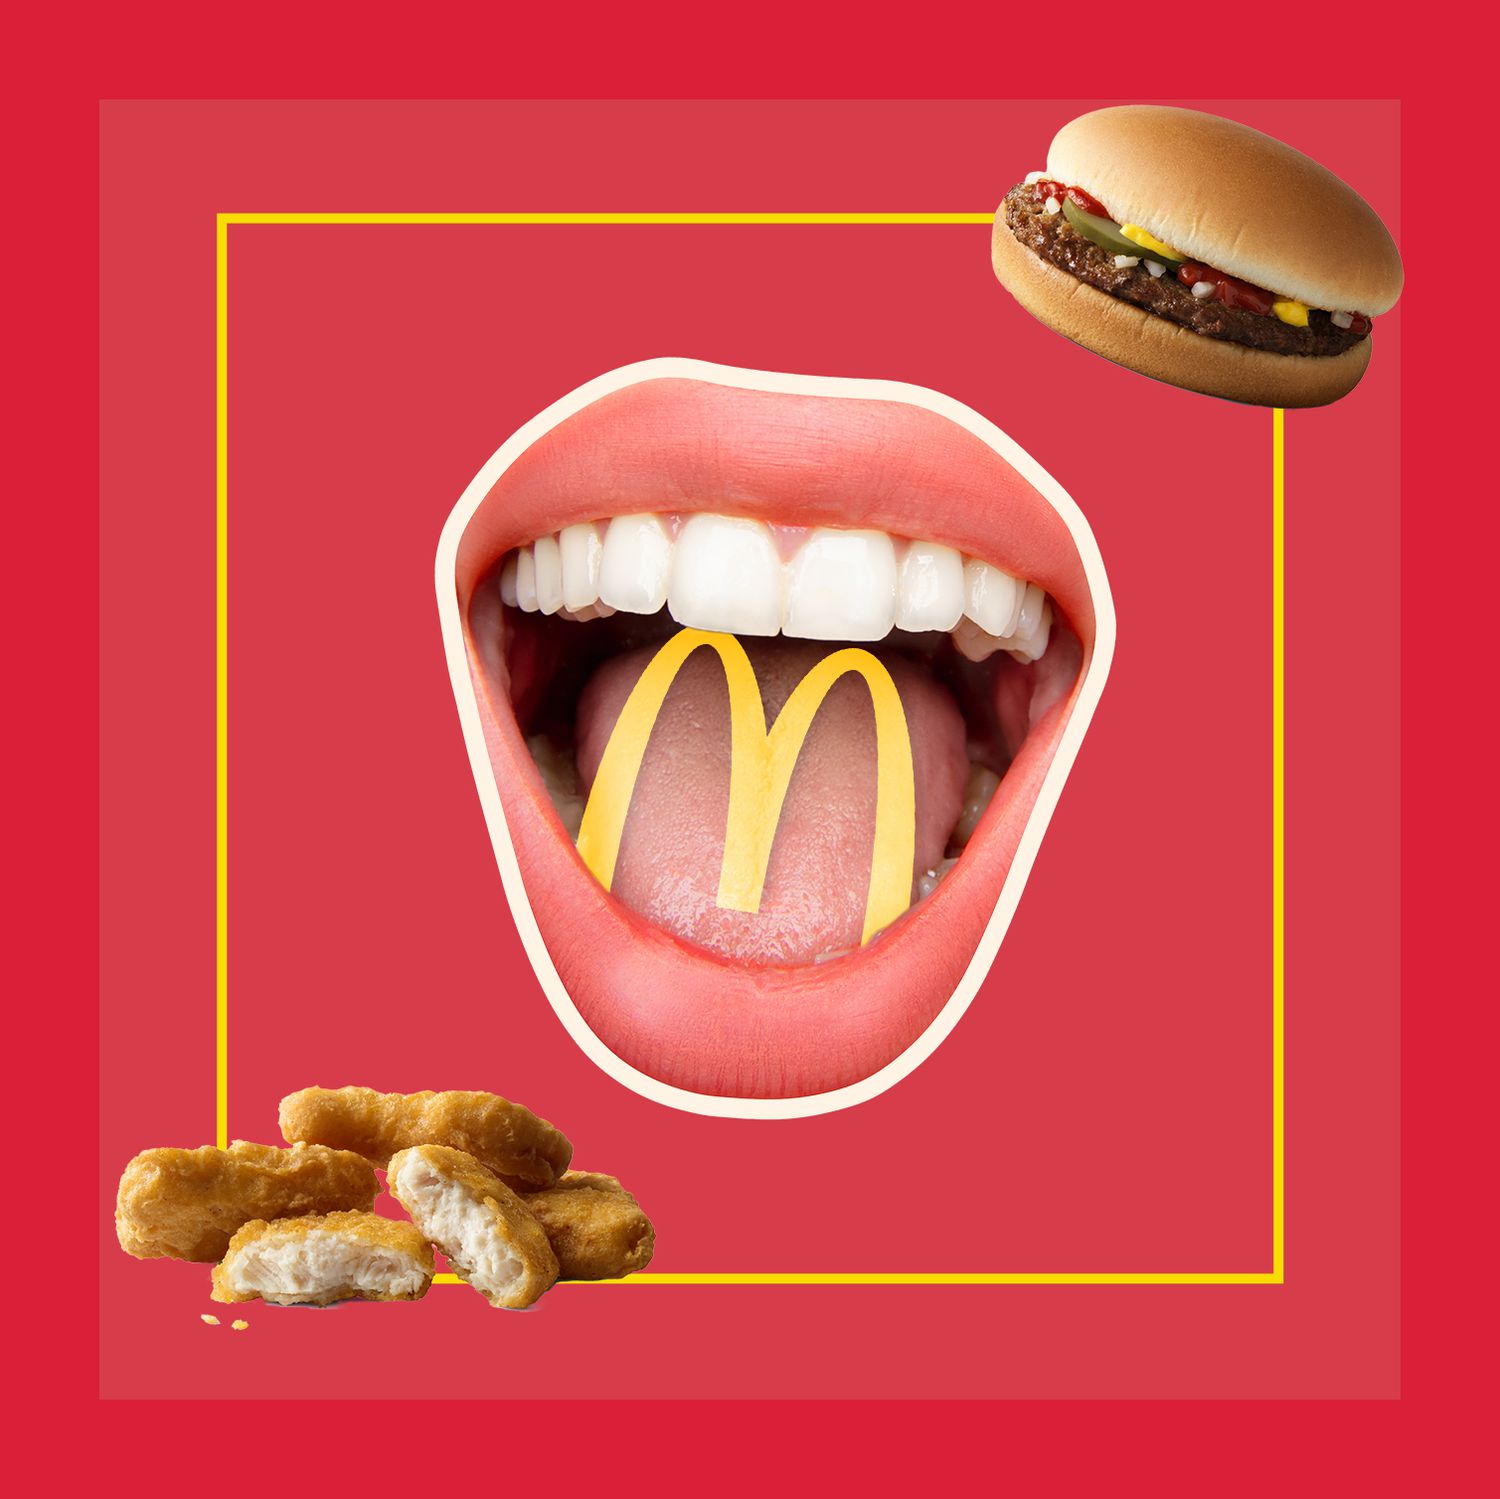 Where Does McDonald's Get Their Meat In 2022? (Full Guide)